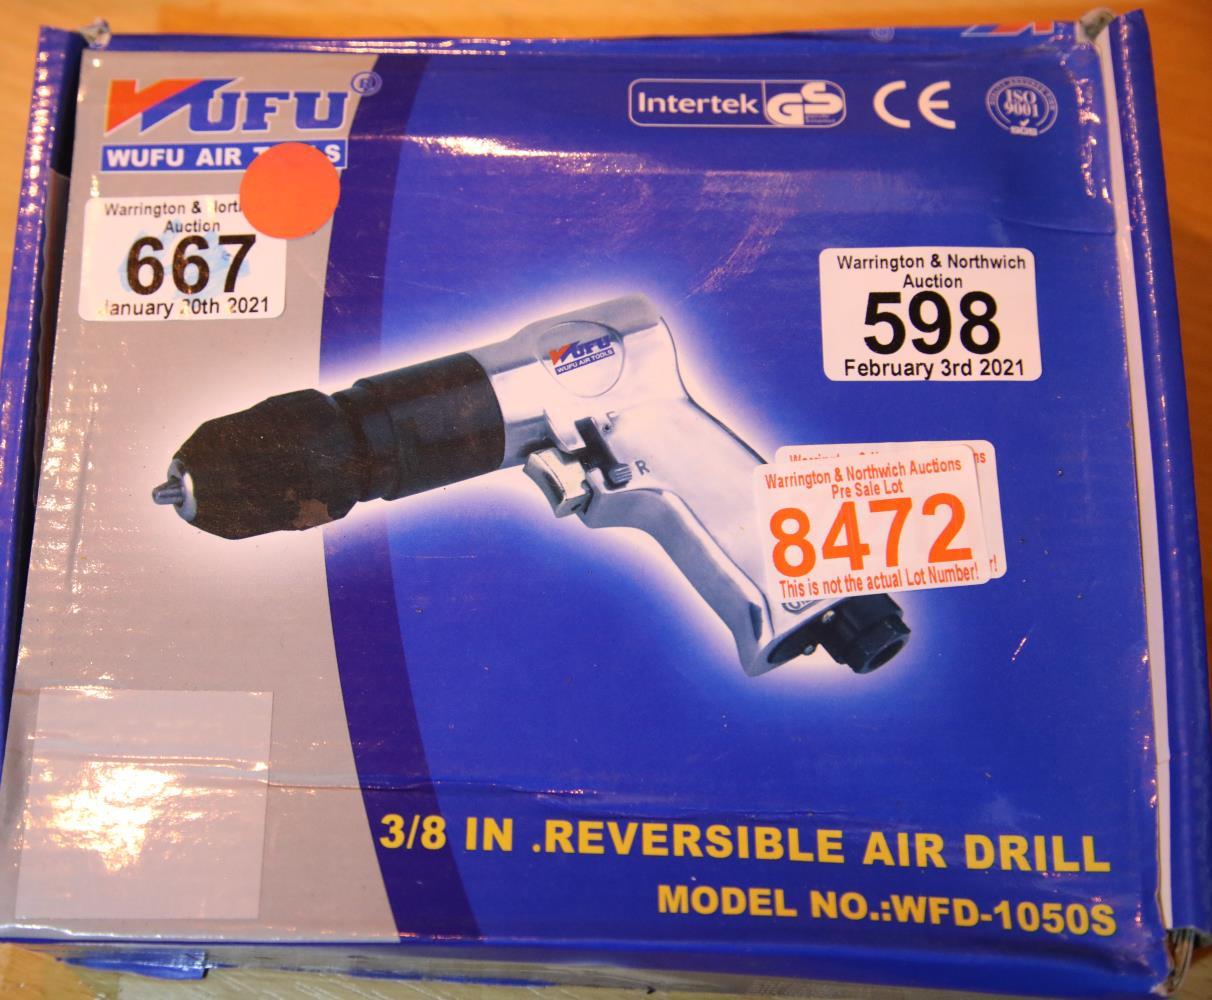 3/8 inch reversible air drill. P&P Group 1 (£14+VAT for the first lot and £1+VAT for subsequent